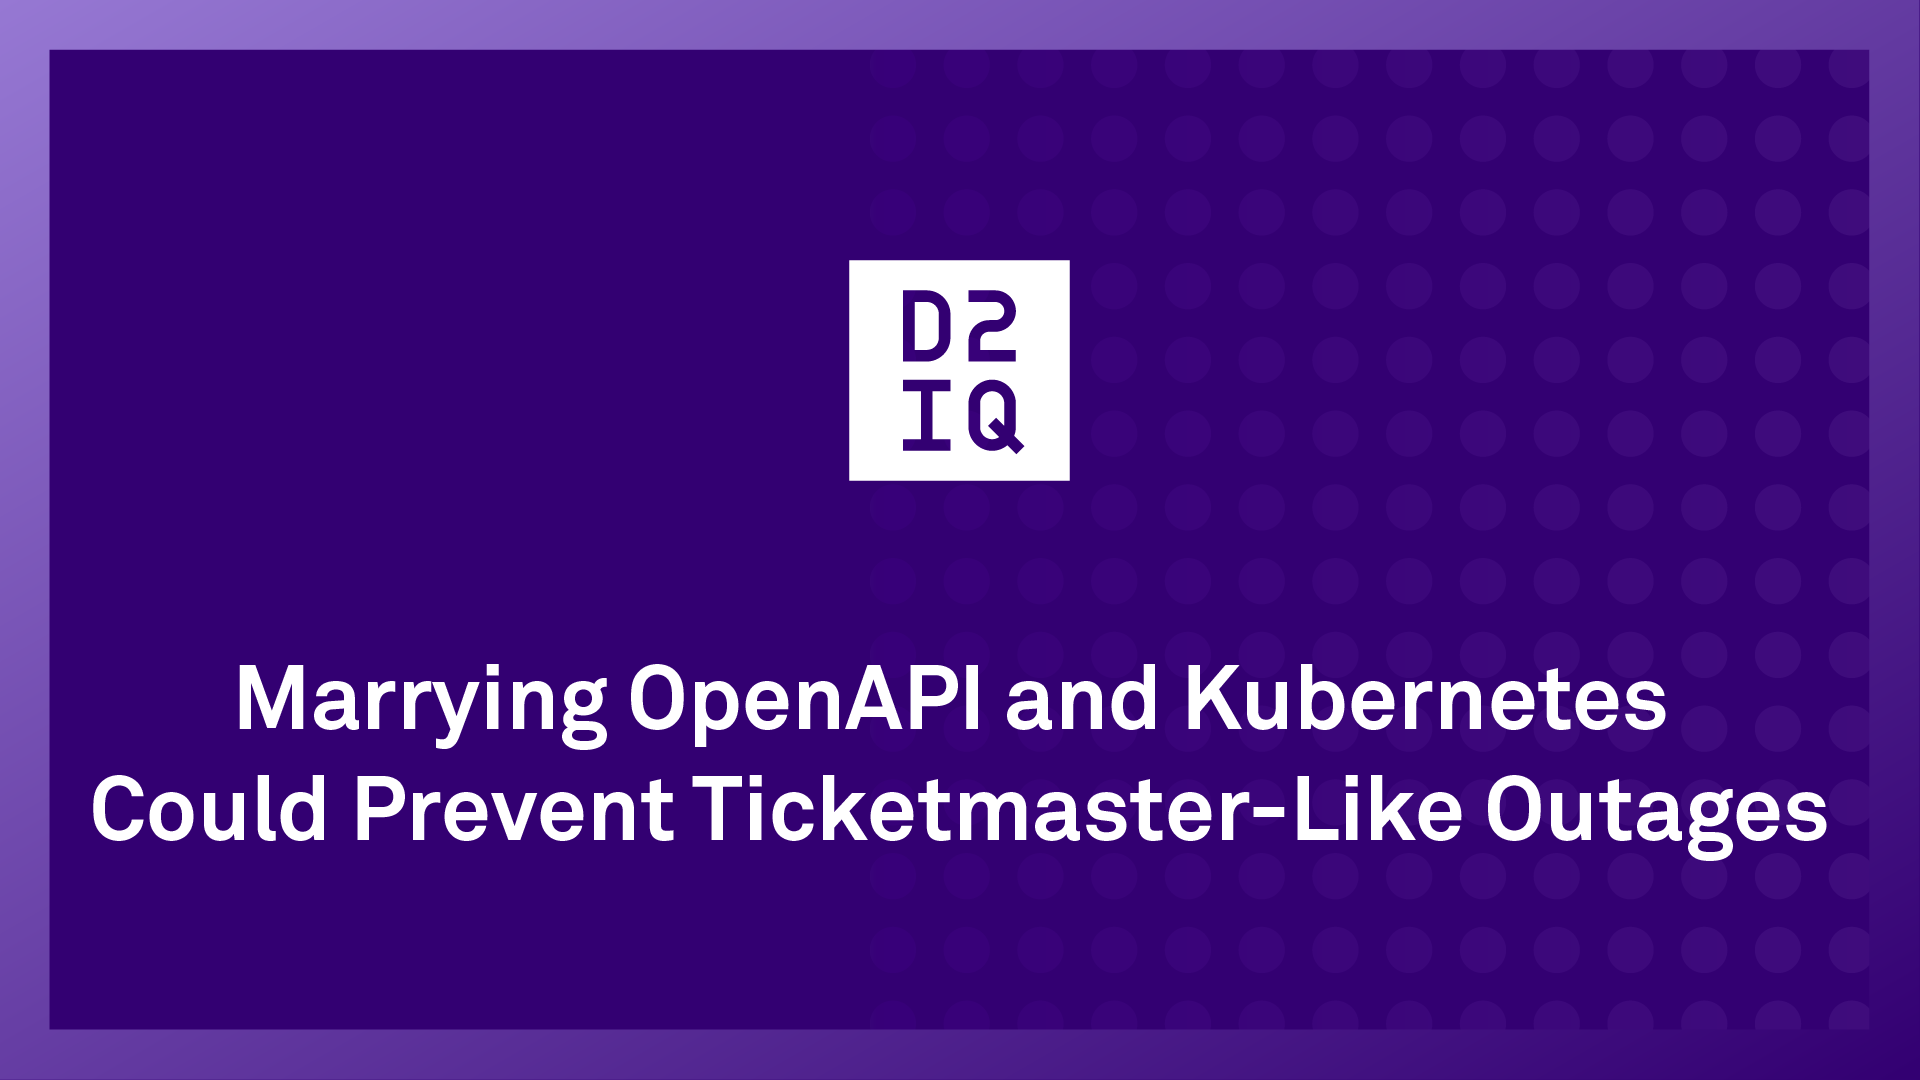 Marrying OpenAPI and Kubernetes Could Prevent Ticketmaster-Like Outages